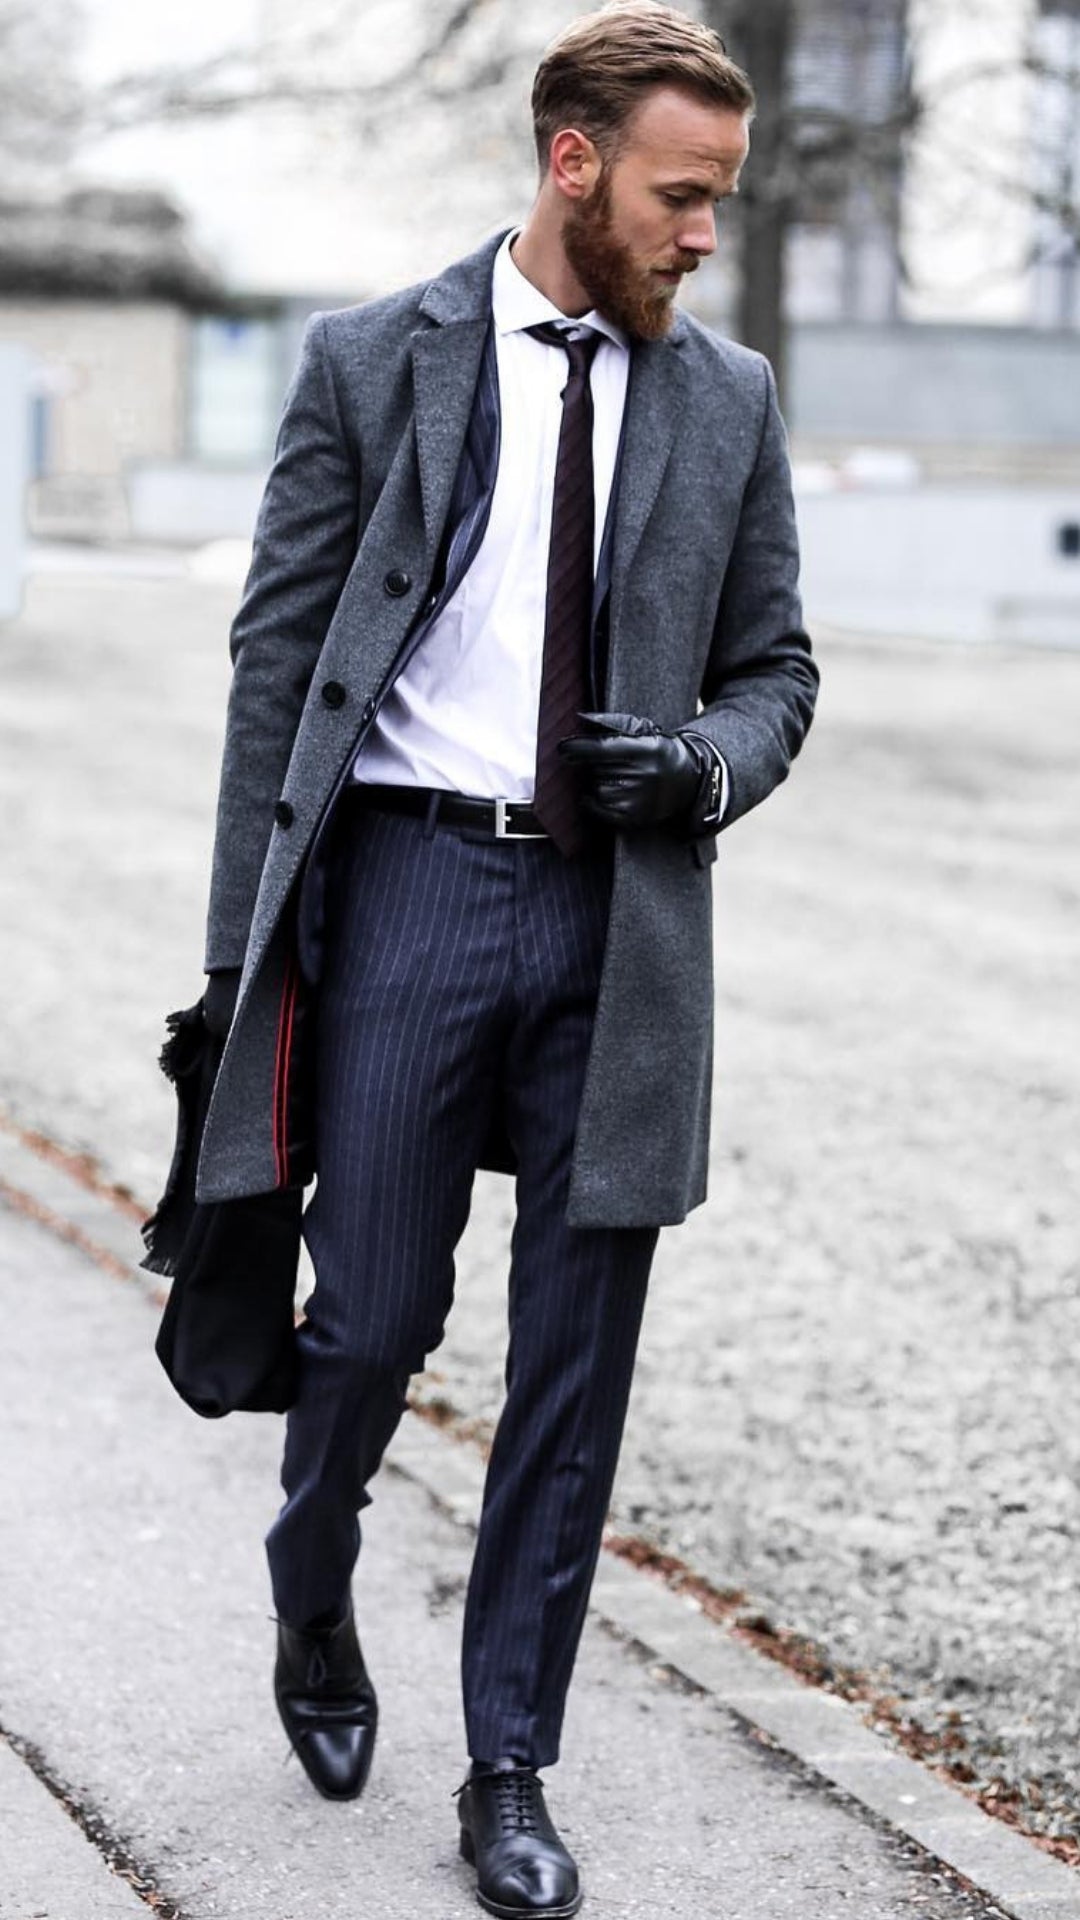 5 Formal Outfits To Look Sharp For Men #formaloutfits #mensfashion # ...